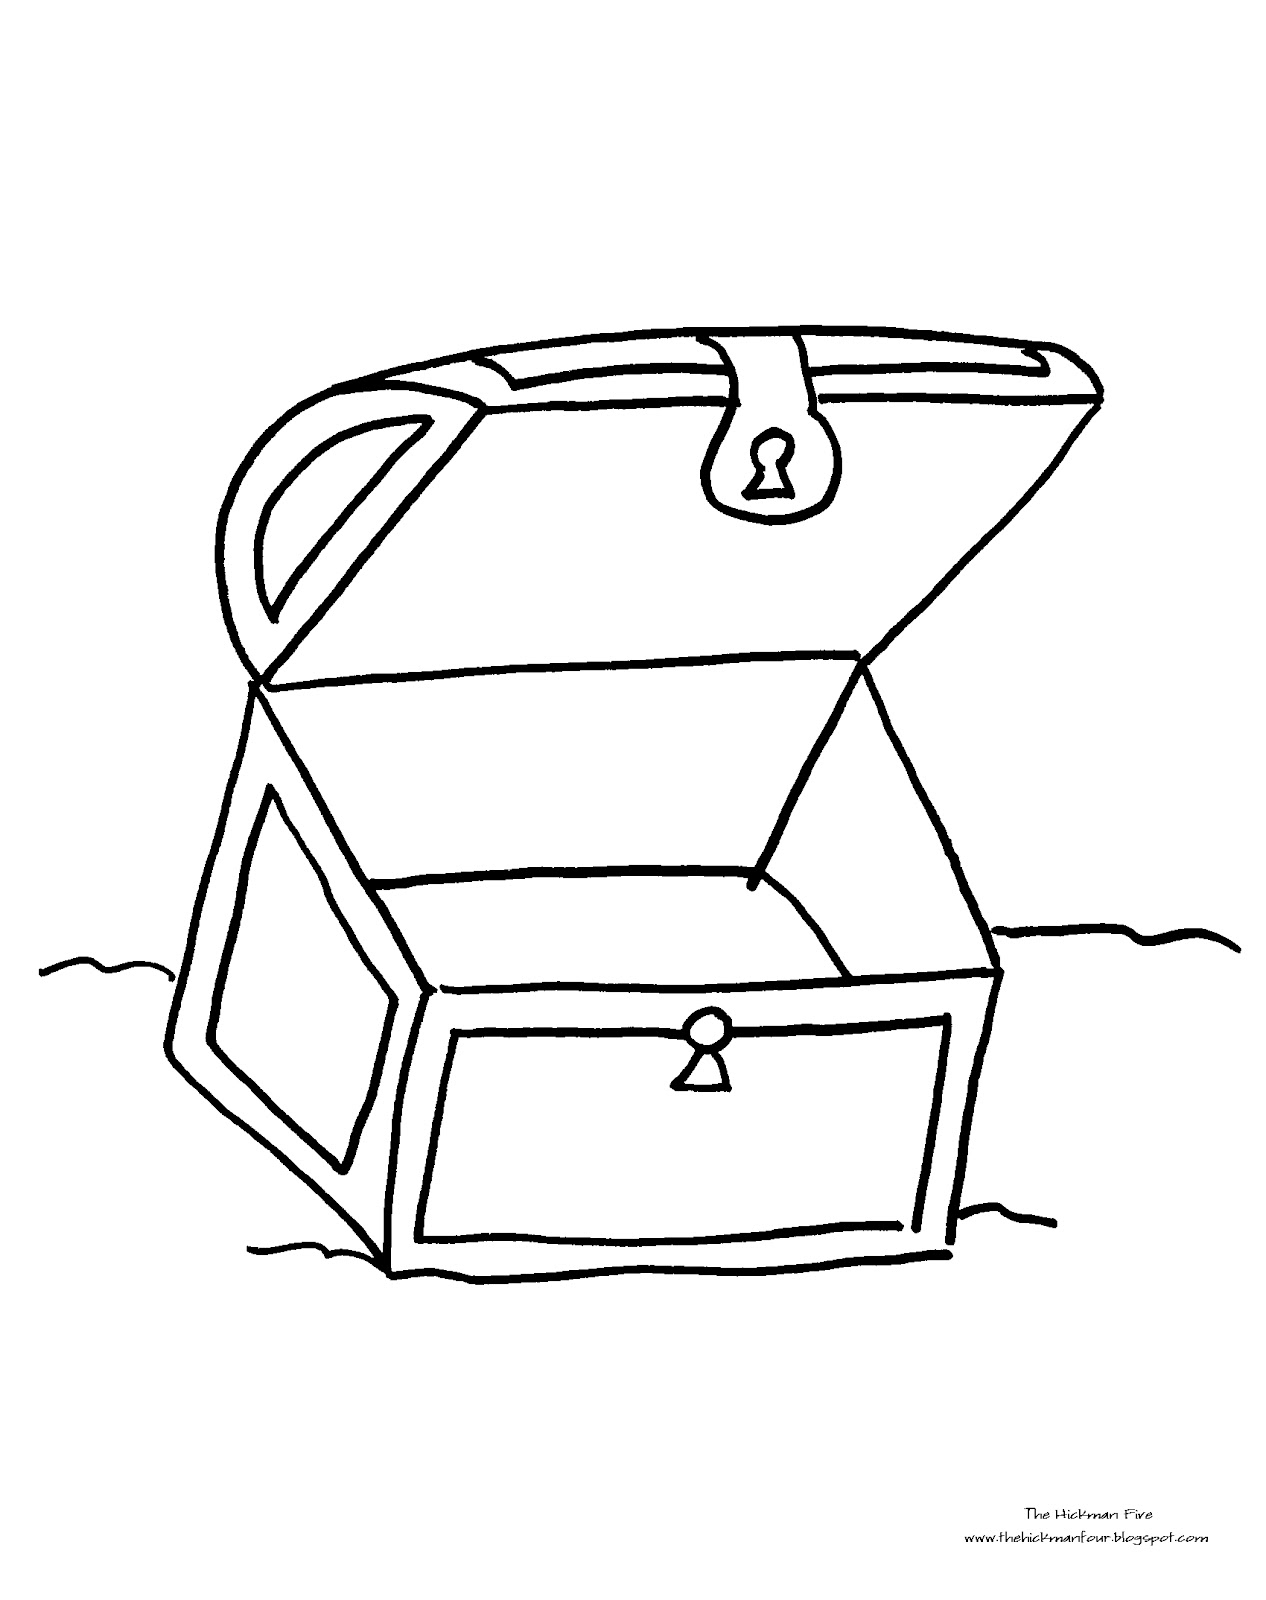 Treasure Chest Map T1jW0 - Coloring Pages For Kids